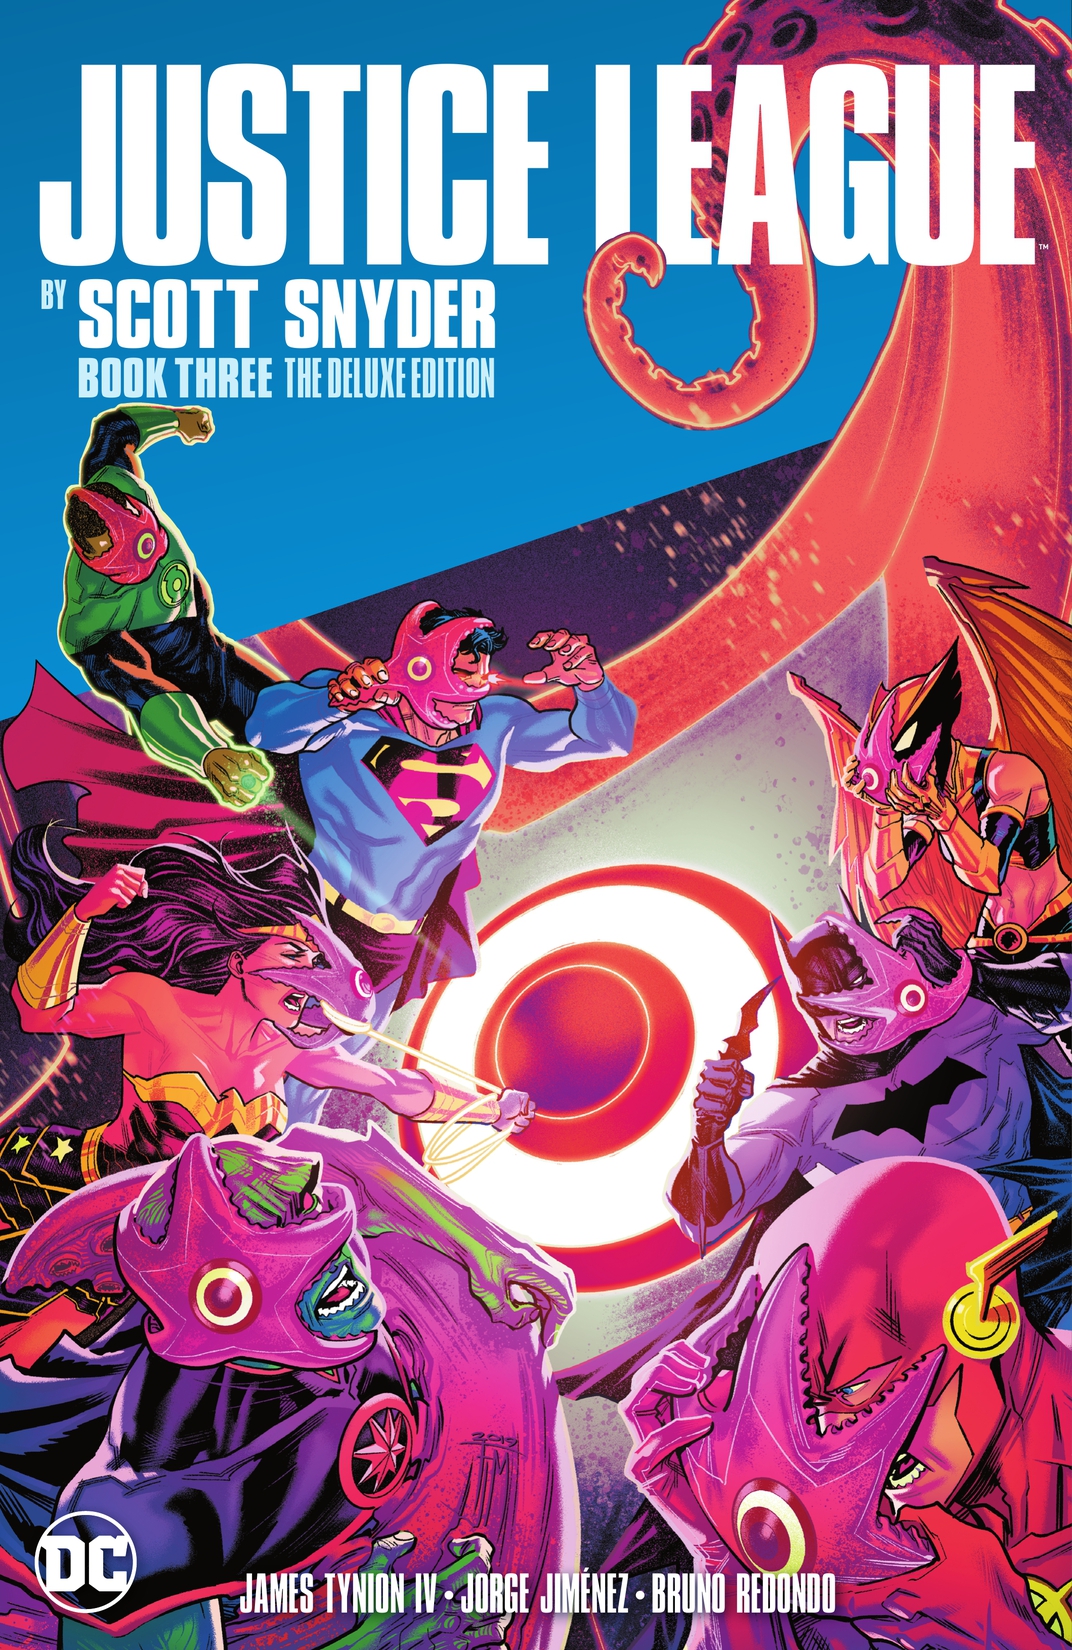 Justice League by Scott Snyder Deluxe Edition Book Three preview images